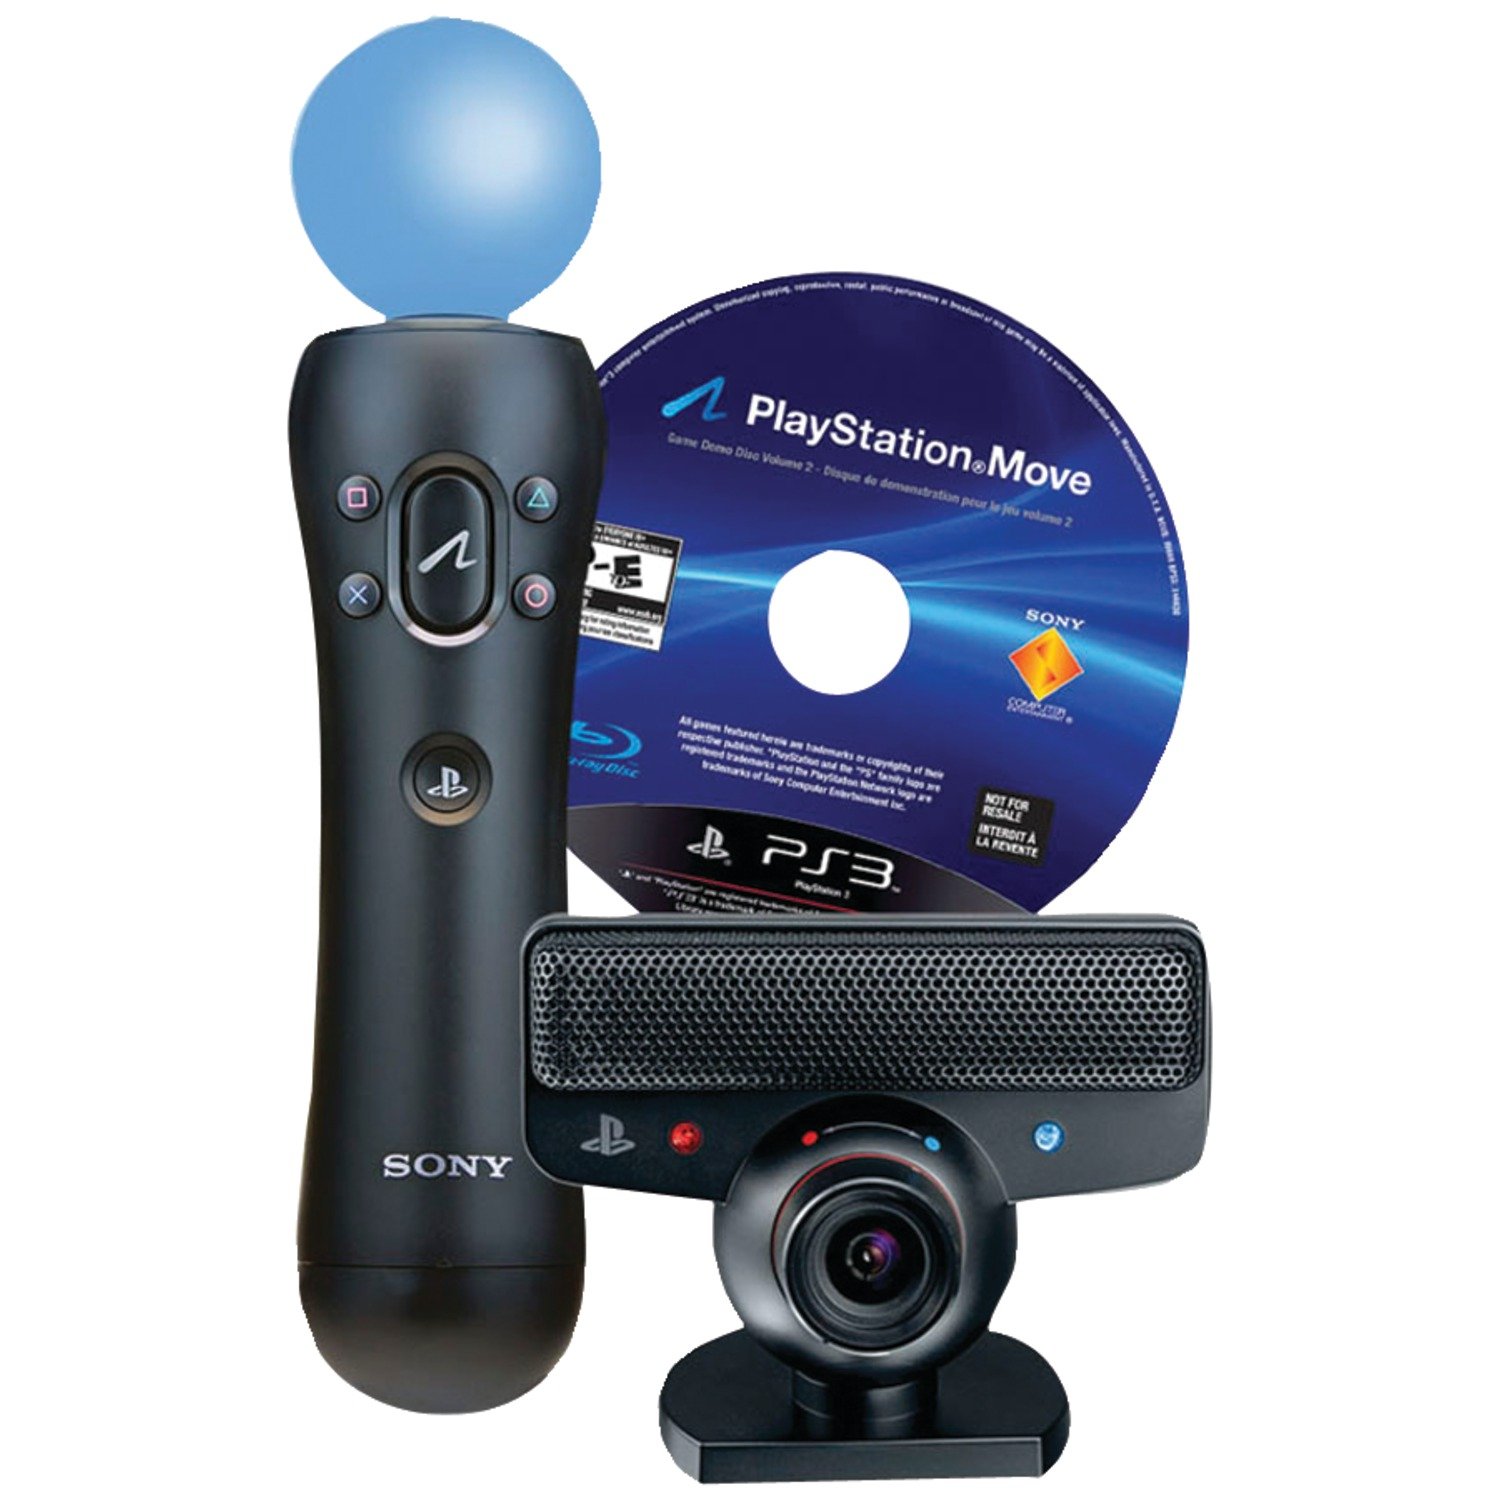 playstation move essentials pack